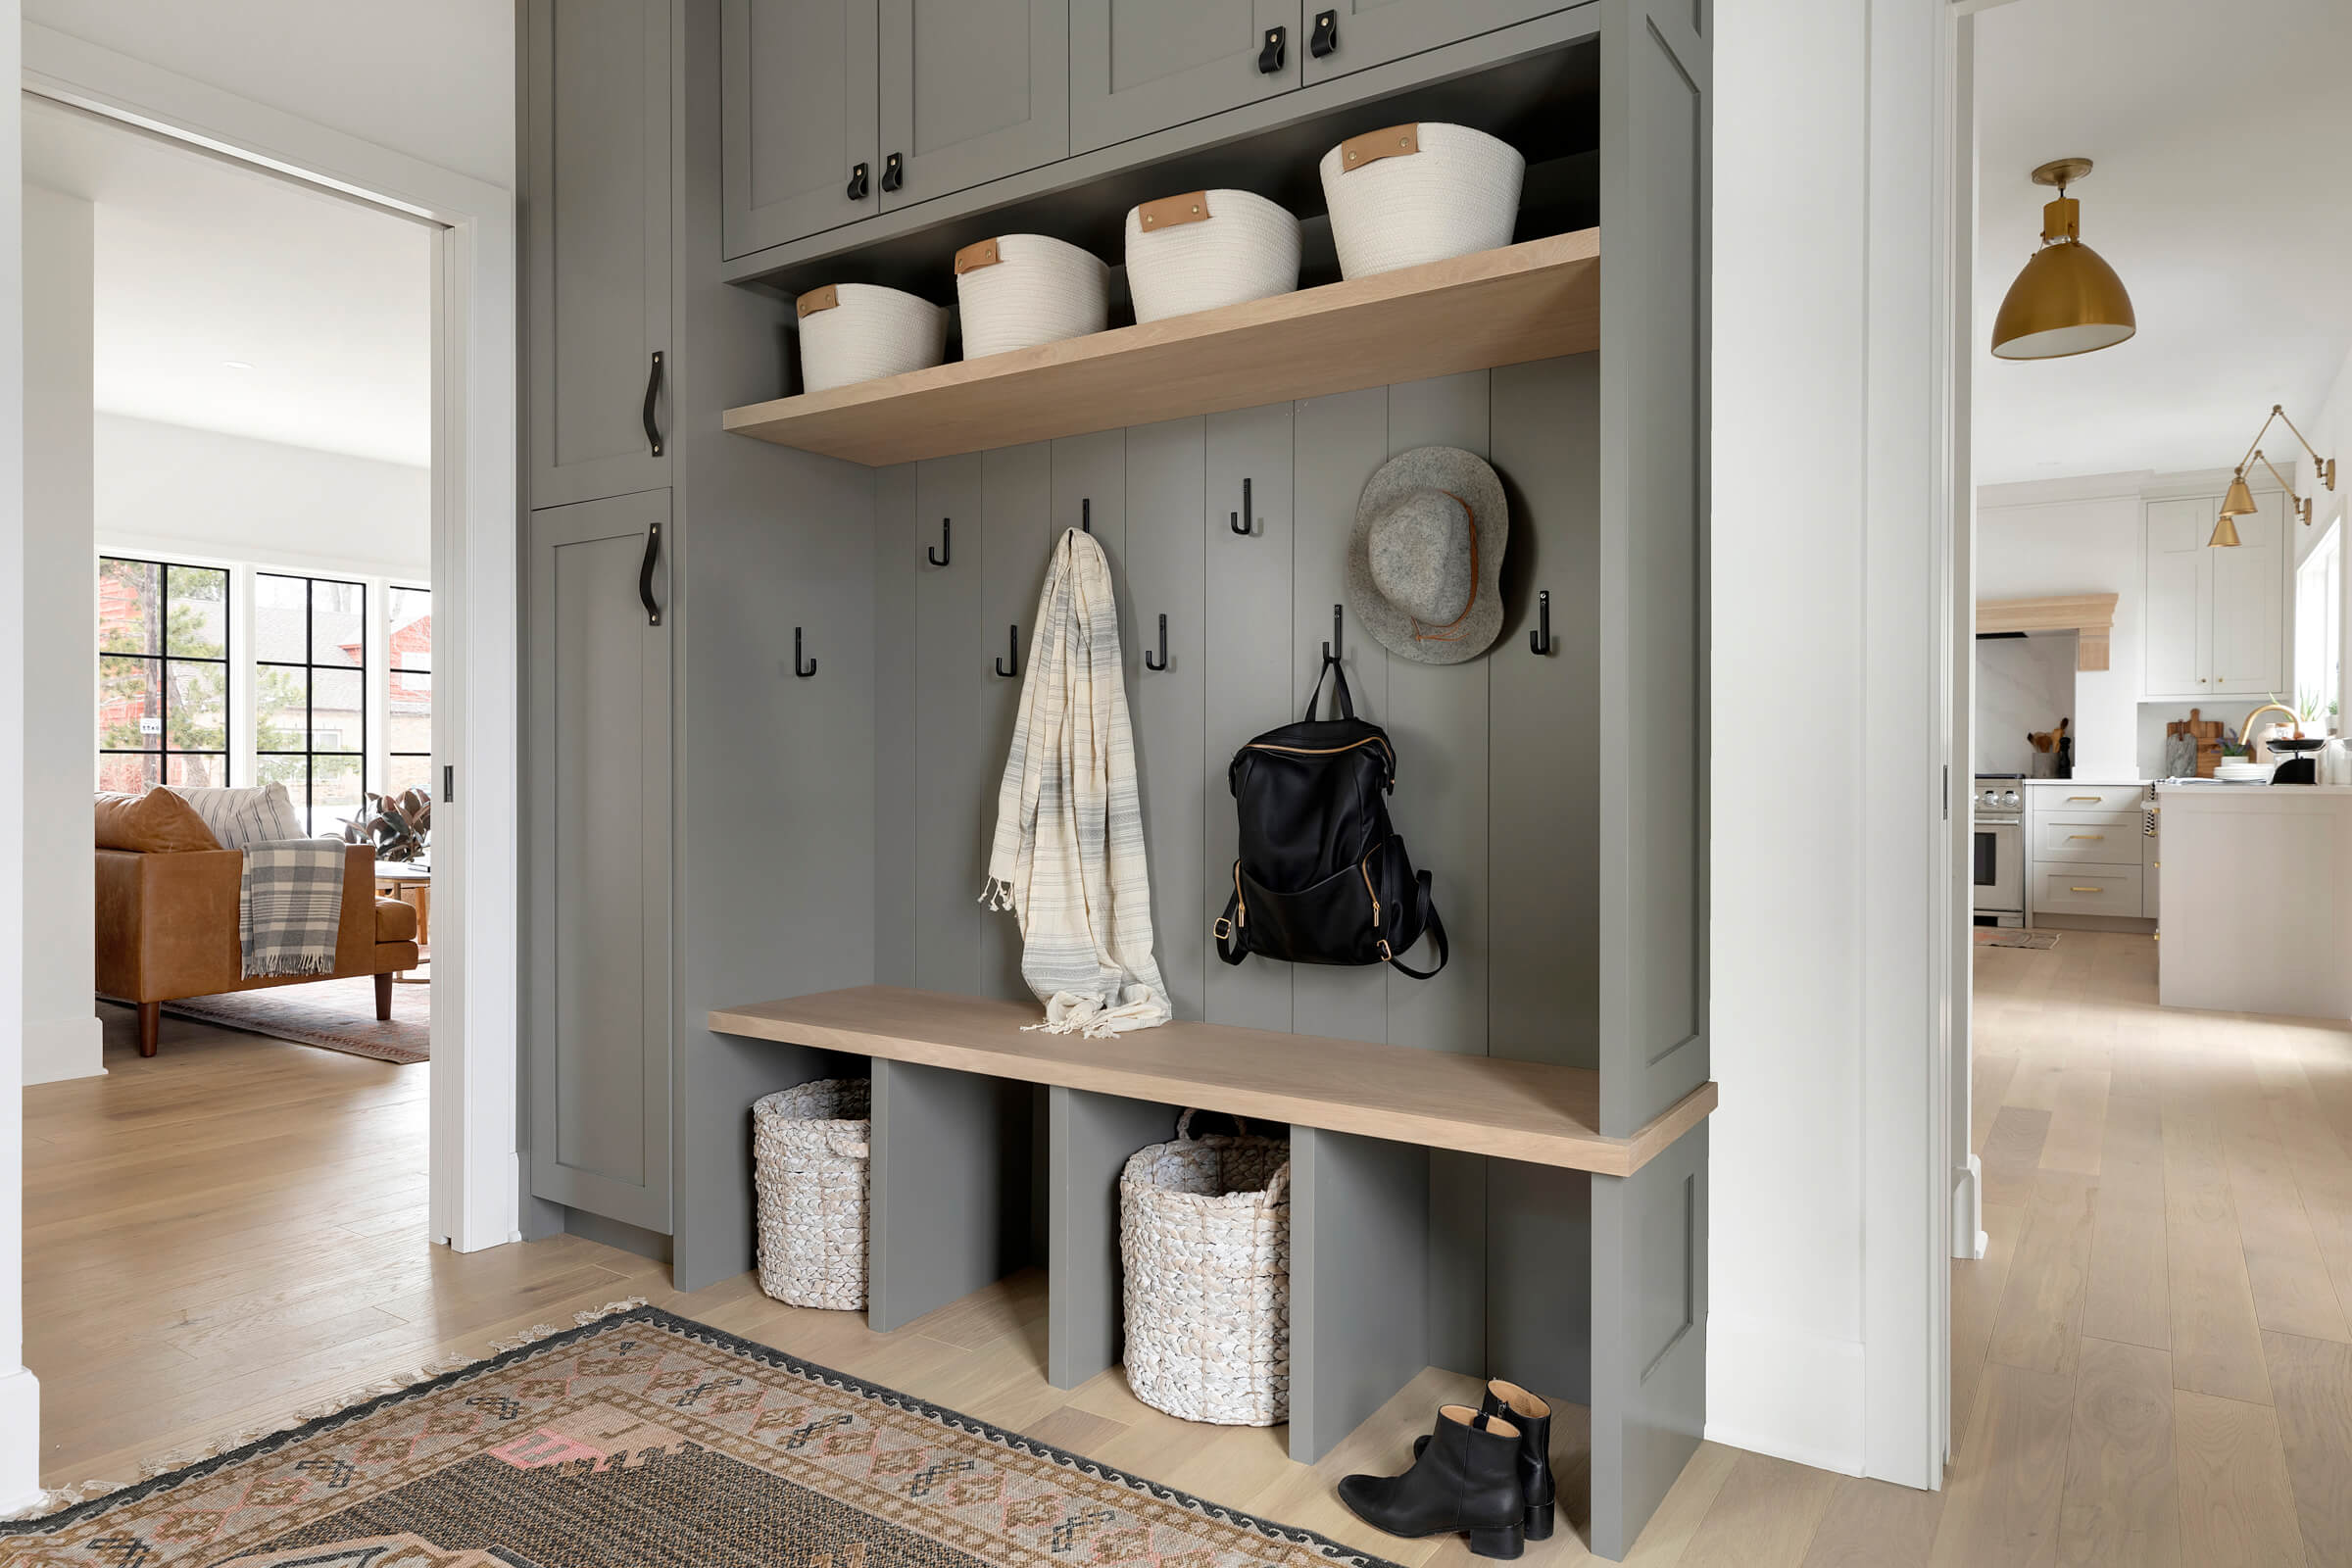 Adding a mudroom and powder room into a main floor plan are amongst our most requested items on a renovation wish list. For everyday use these spaces are a game changer.